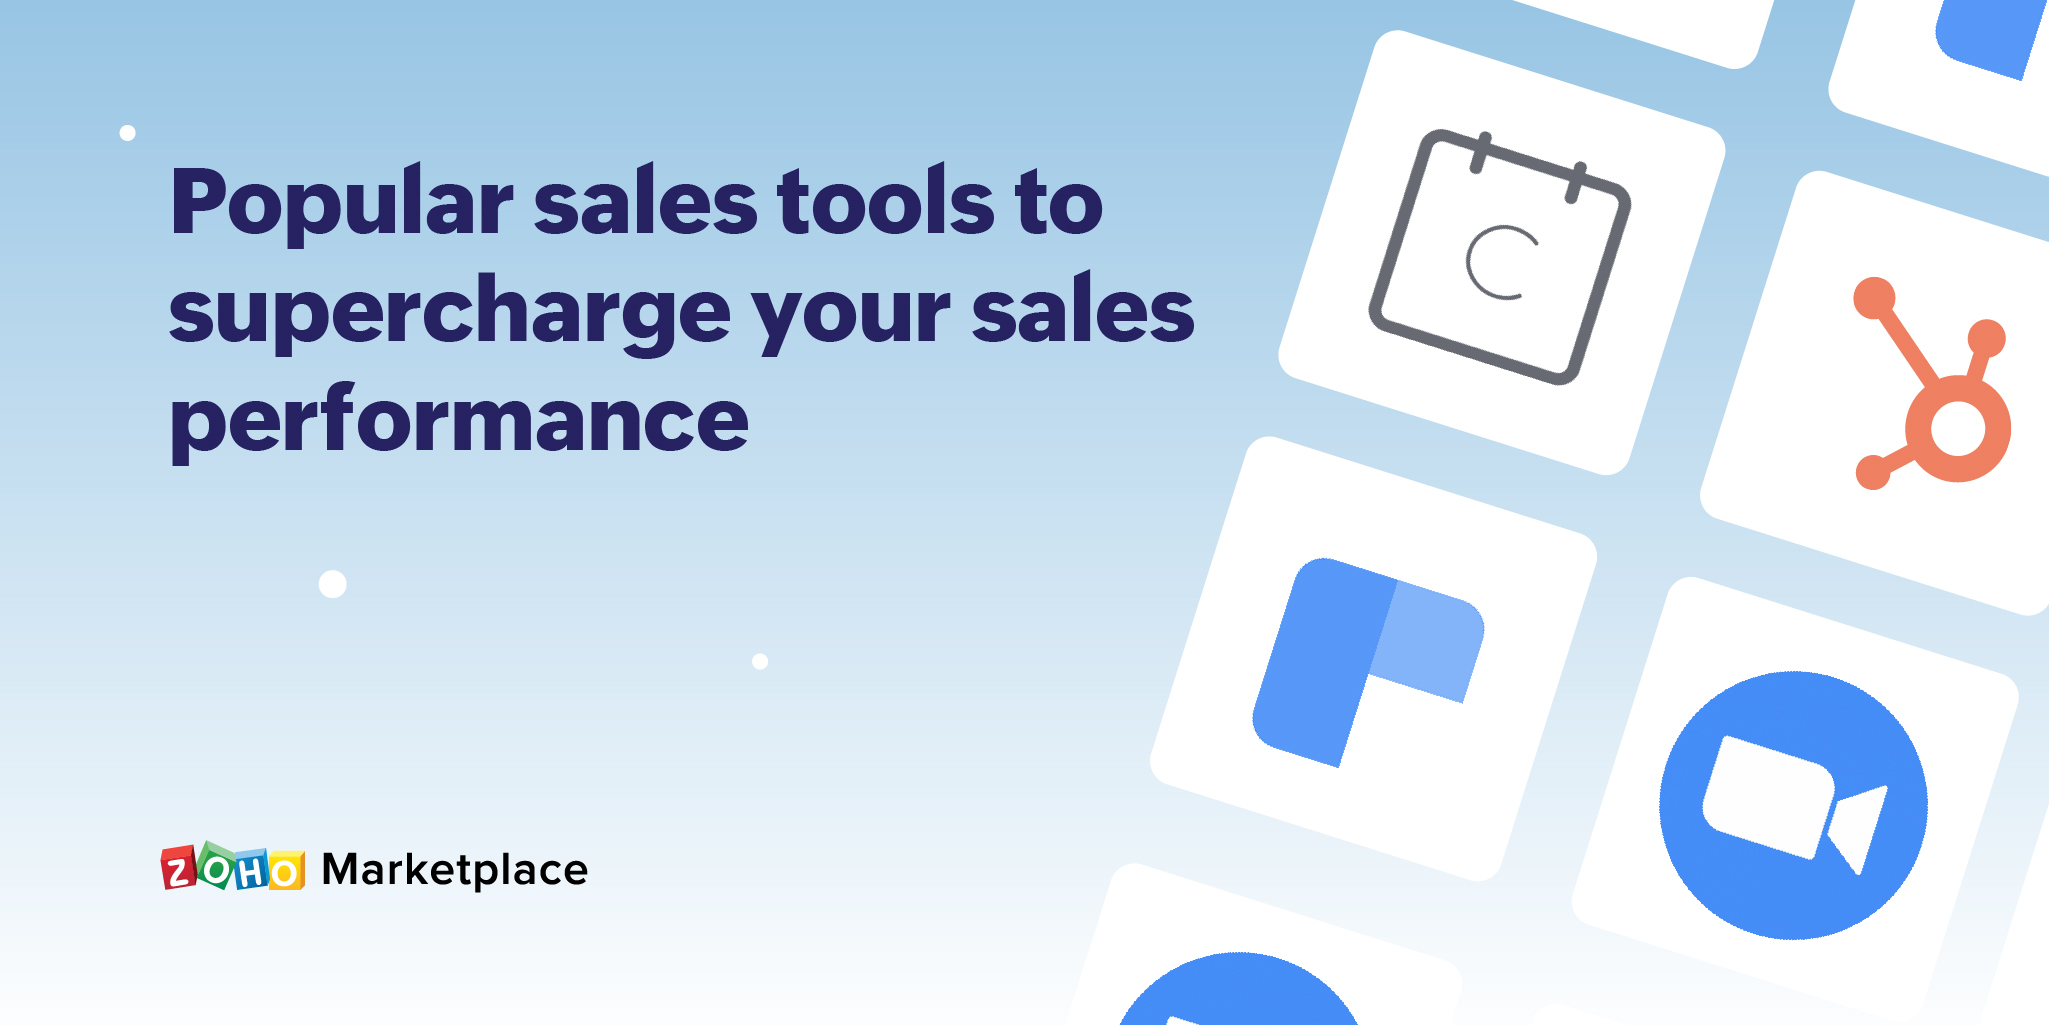 Sales series #1: Popular sales tools to supercharge your sales performance